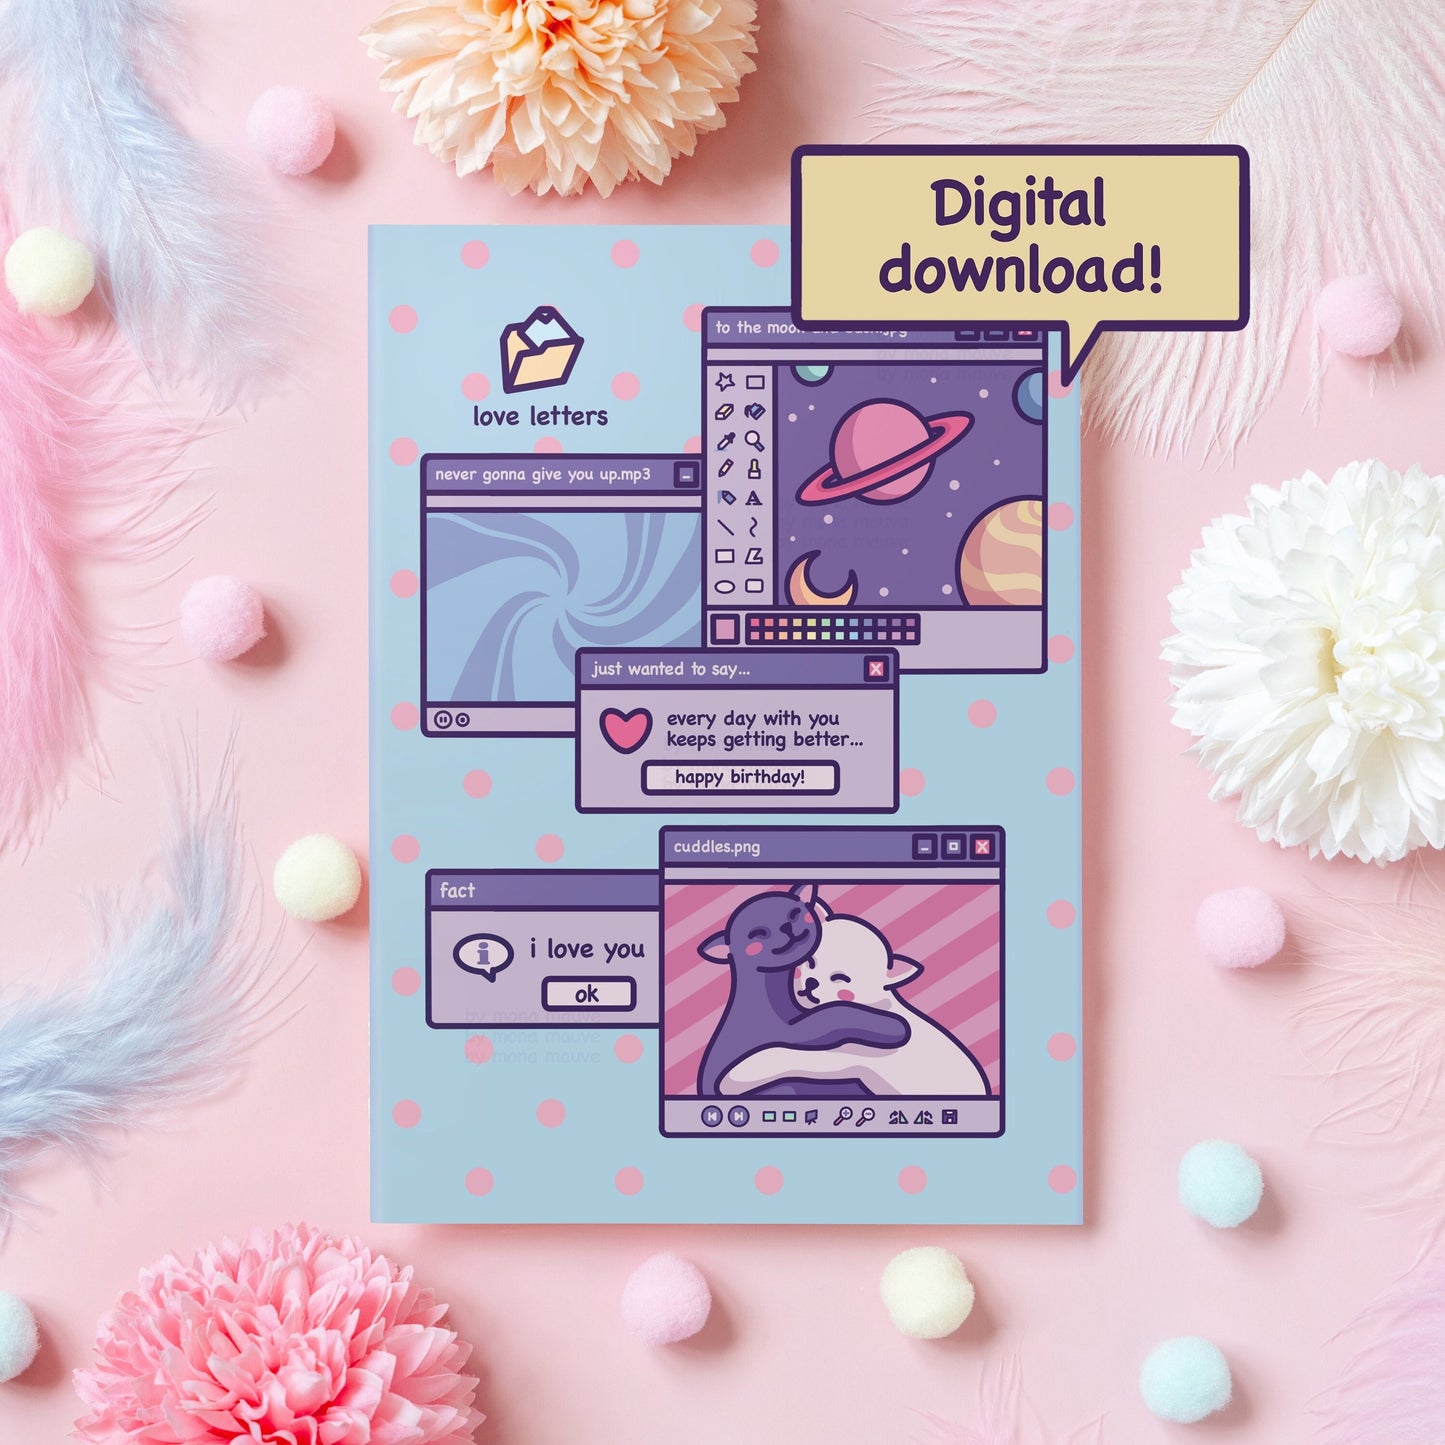 Printable Vaporwave Birthday Card | Instant Digital Download | Every Day Keeps Getting Better | Cute Gift for Boyfriend, Girlfriend, Wife